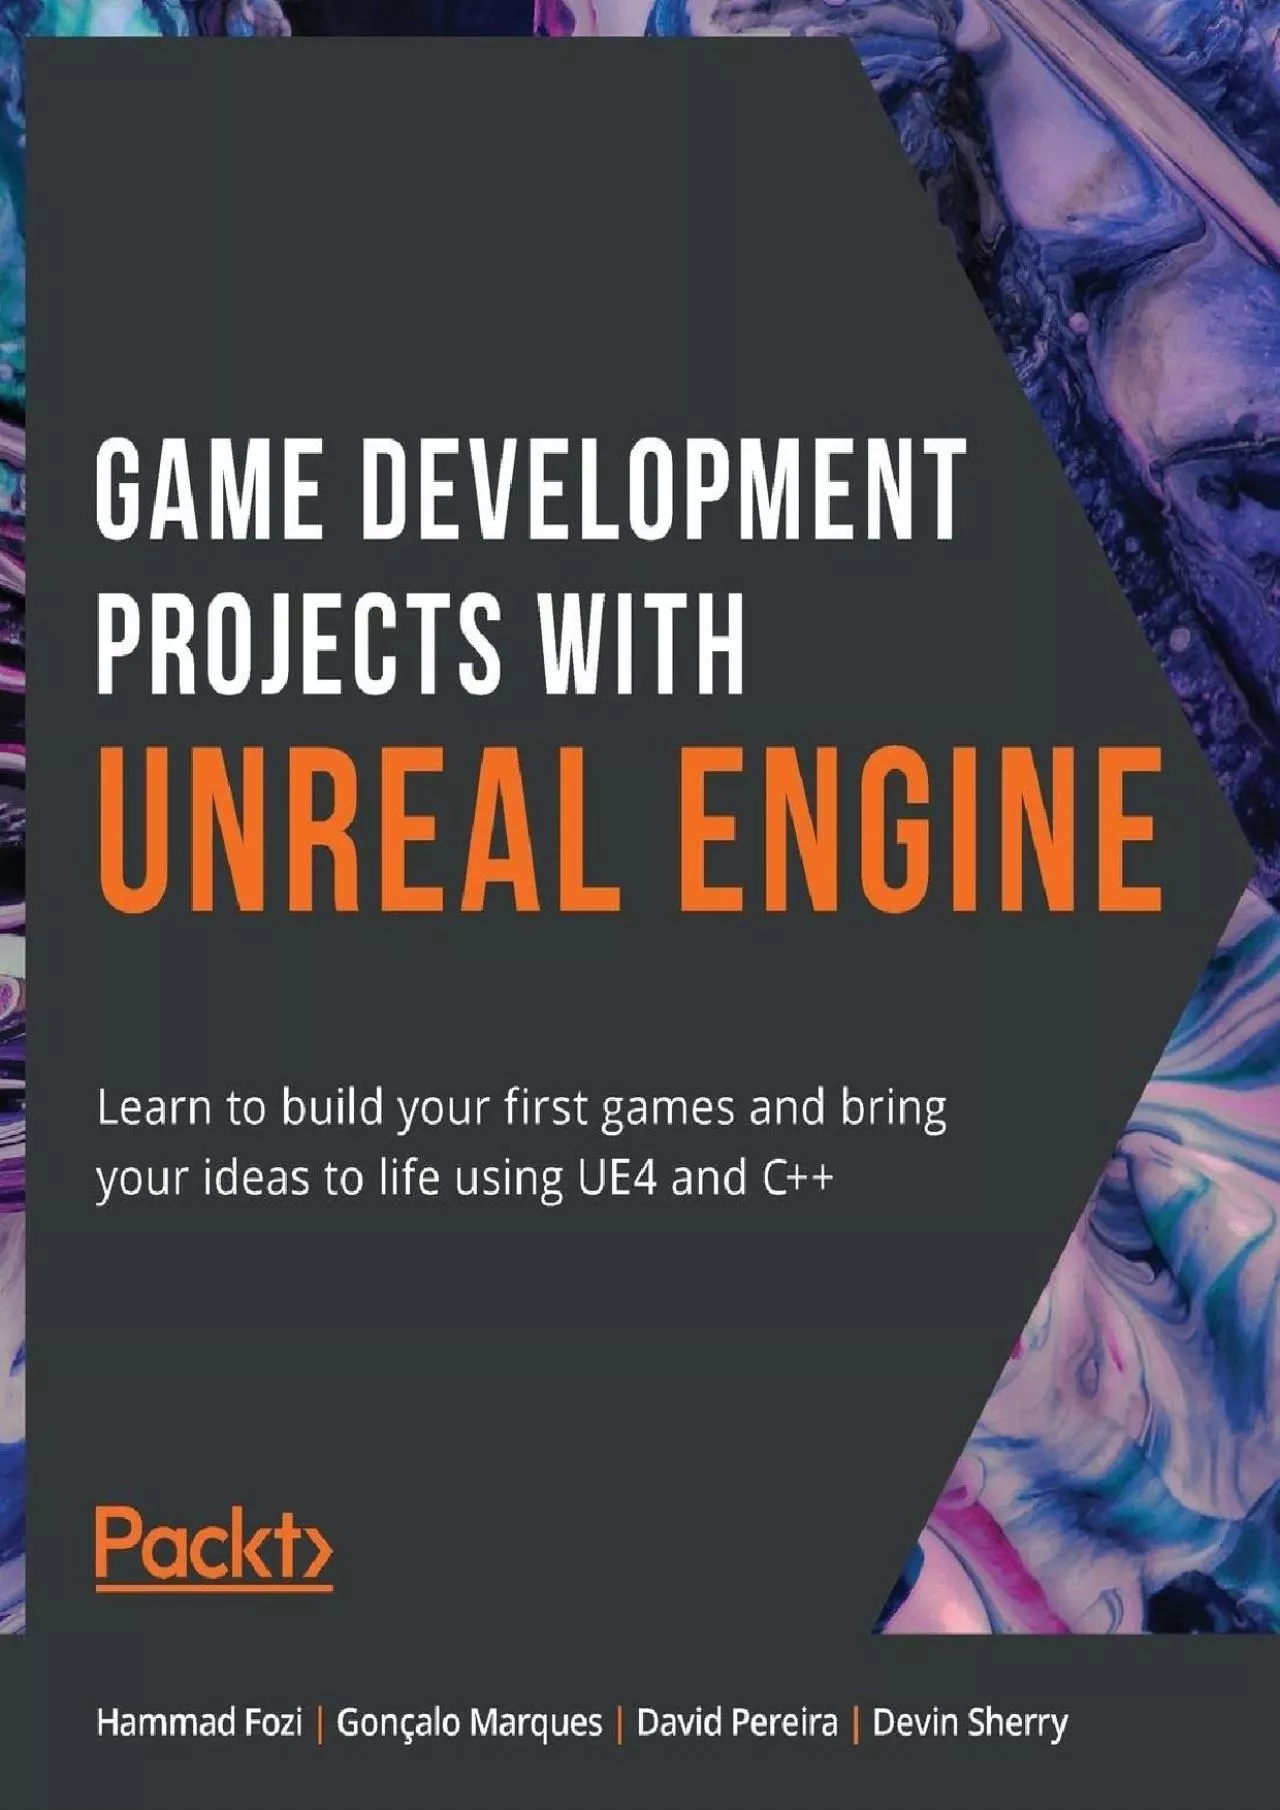 [READING BOOK]-Game Development Projects with Unreal Engine: Learn to build your first